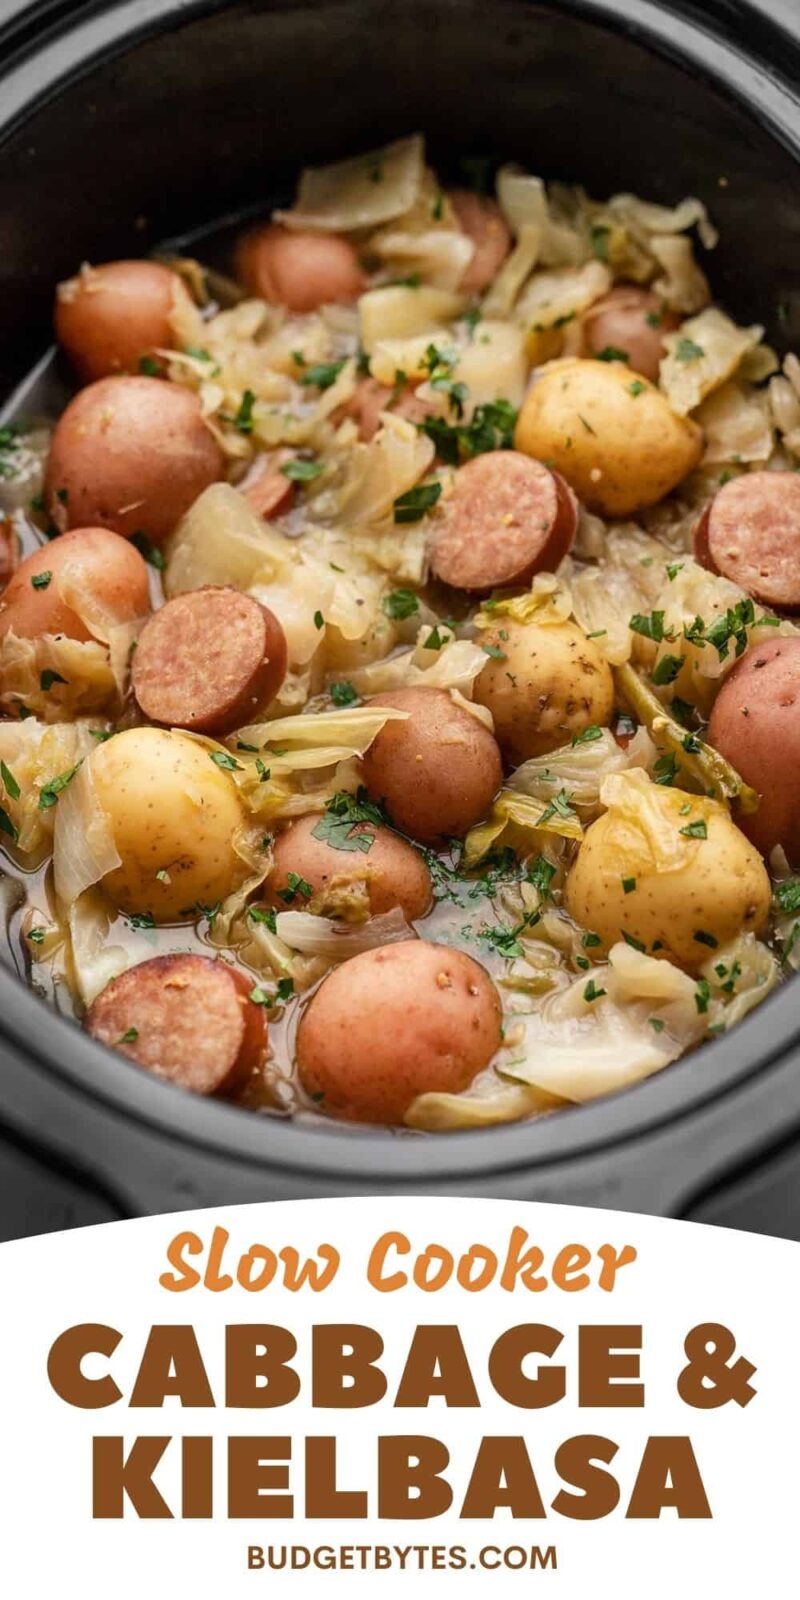 Side view of cabbage and sausage in a slow cooker, title text at the bottom